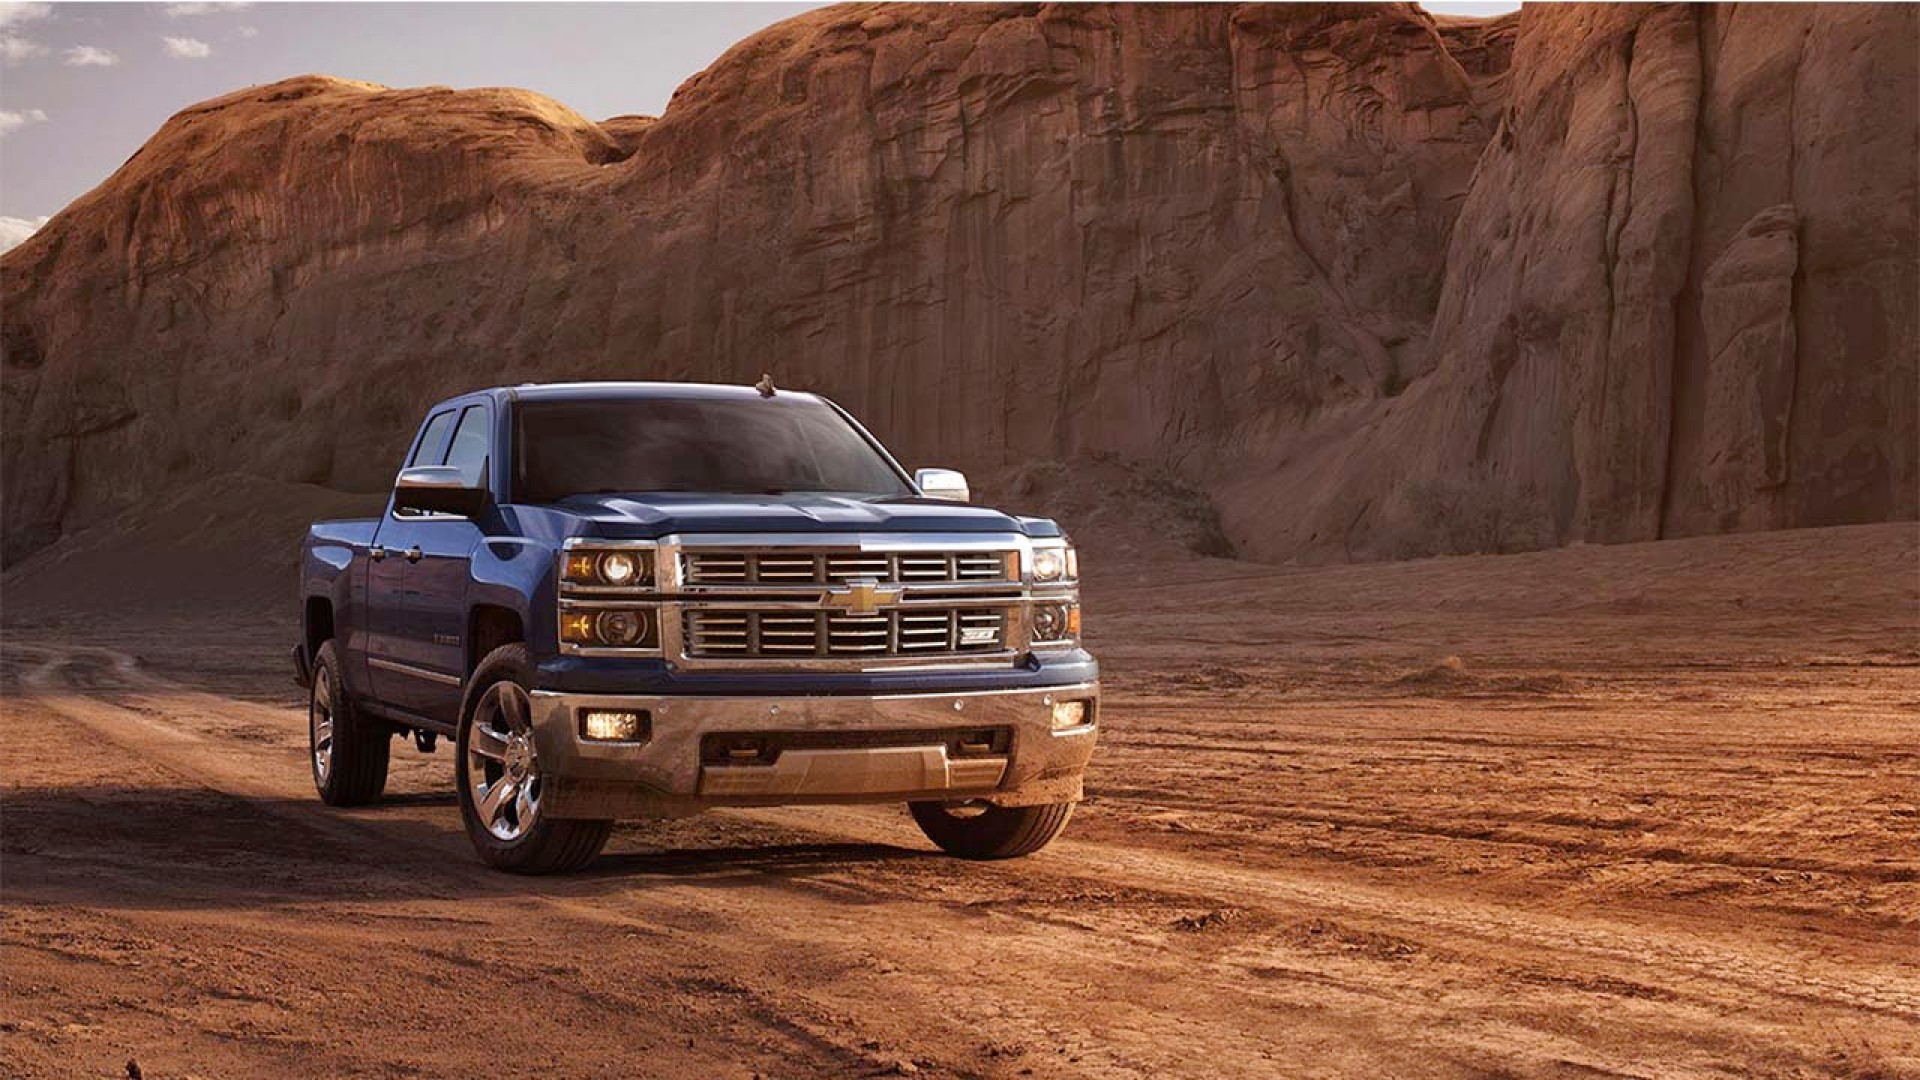 2015 Chevrolet Silverado In Tx Is The Pickup Of The - Chevy Silverado 2015 , HD Wallpaper & Backgrounds